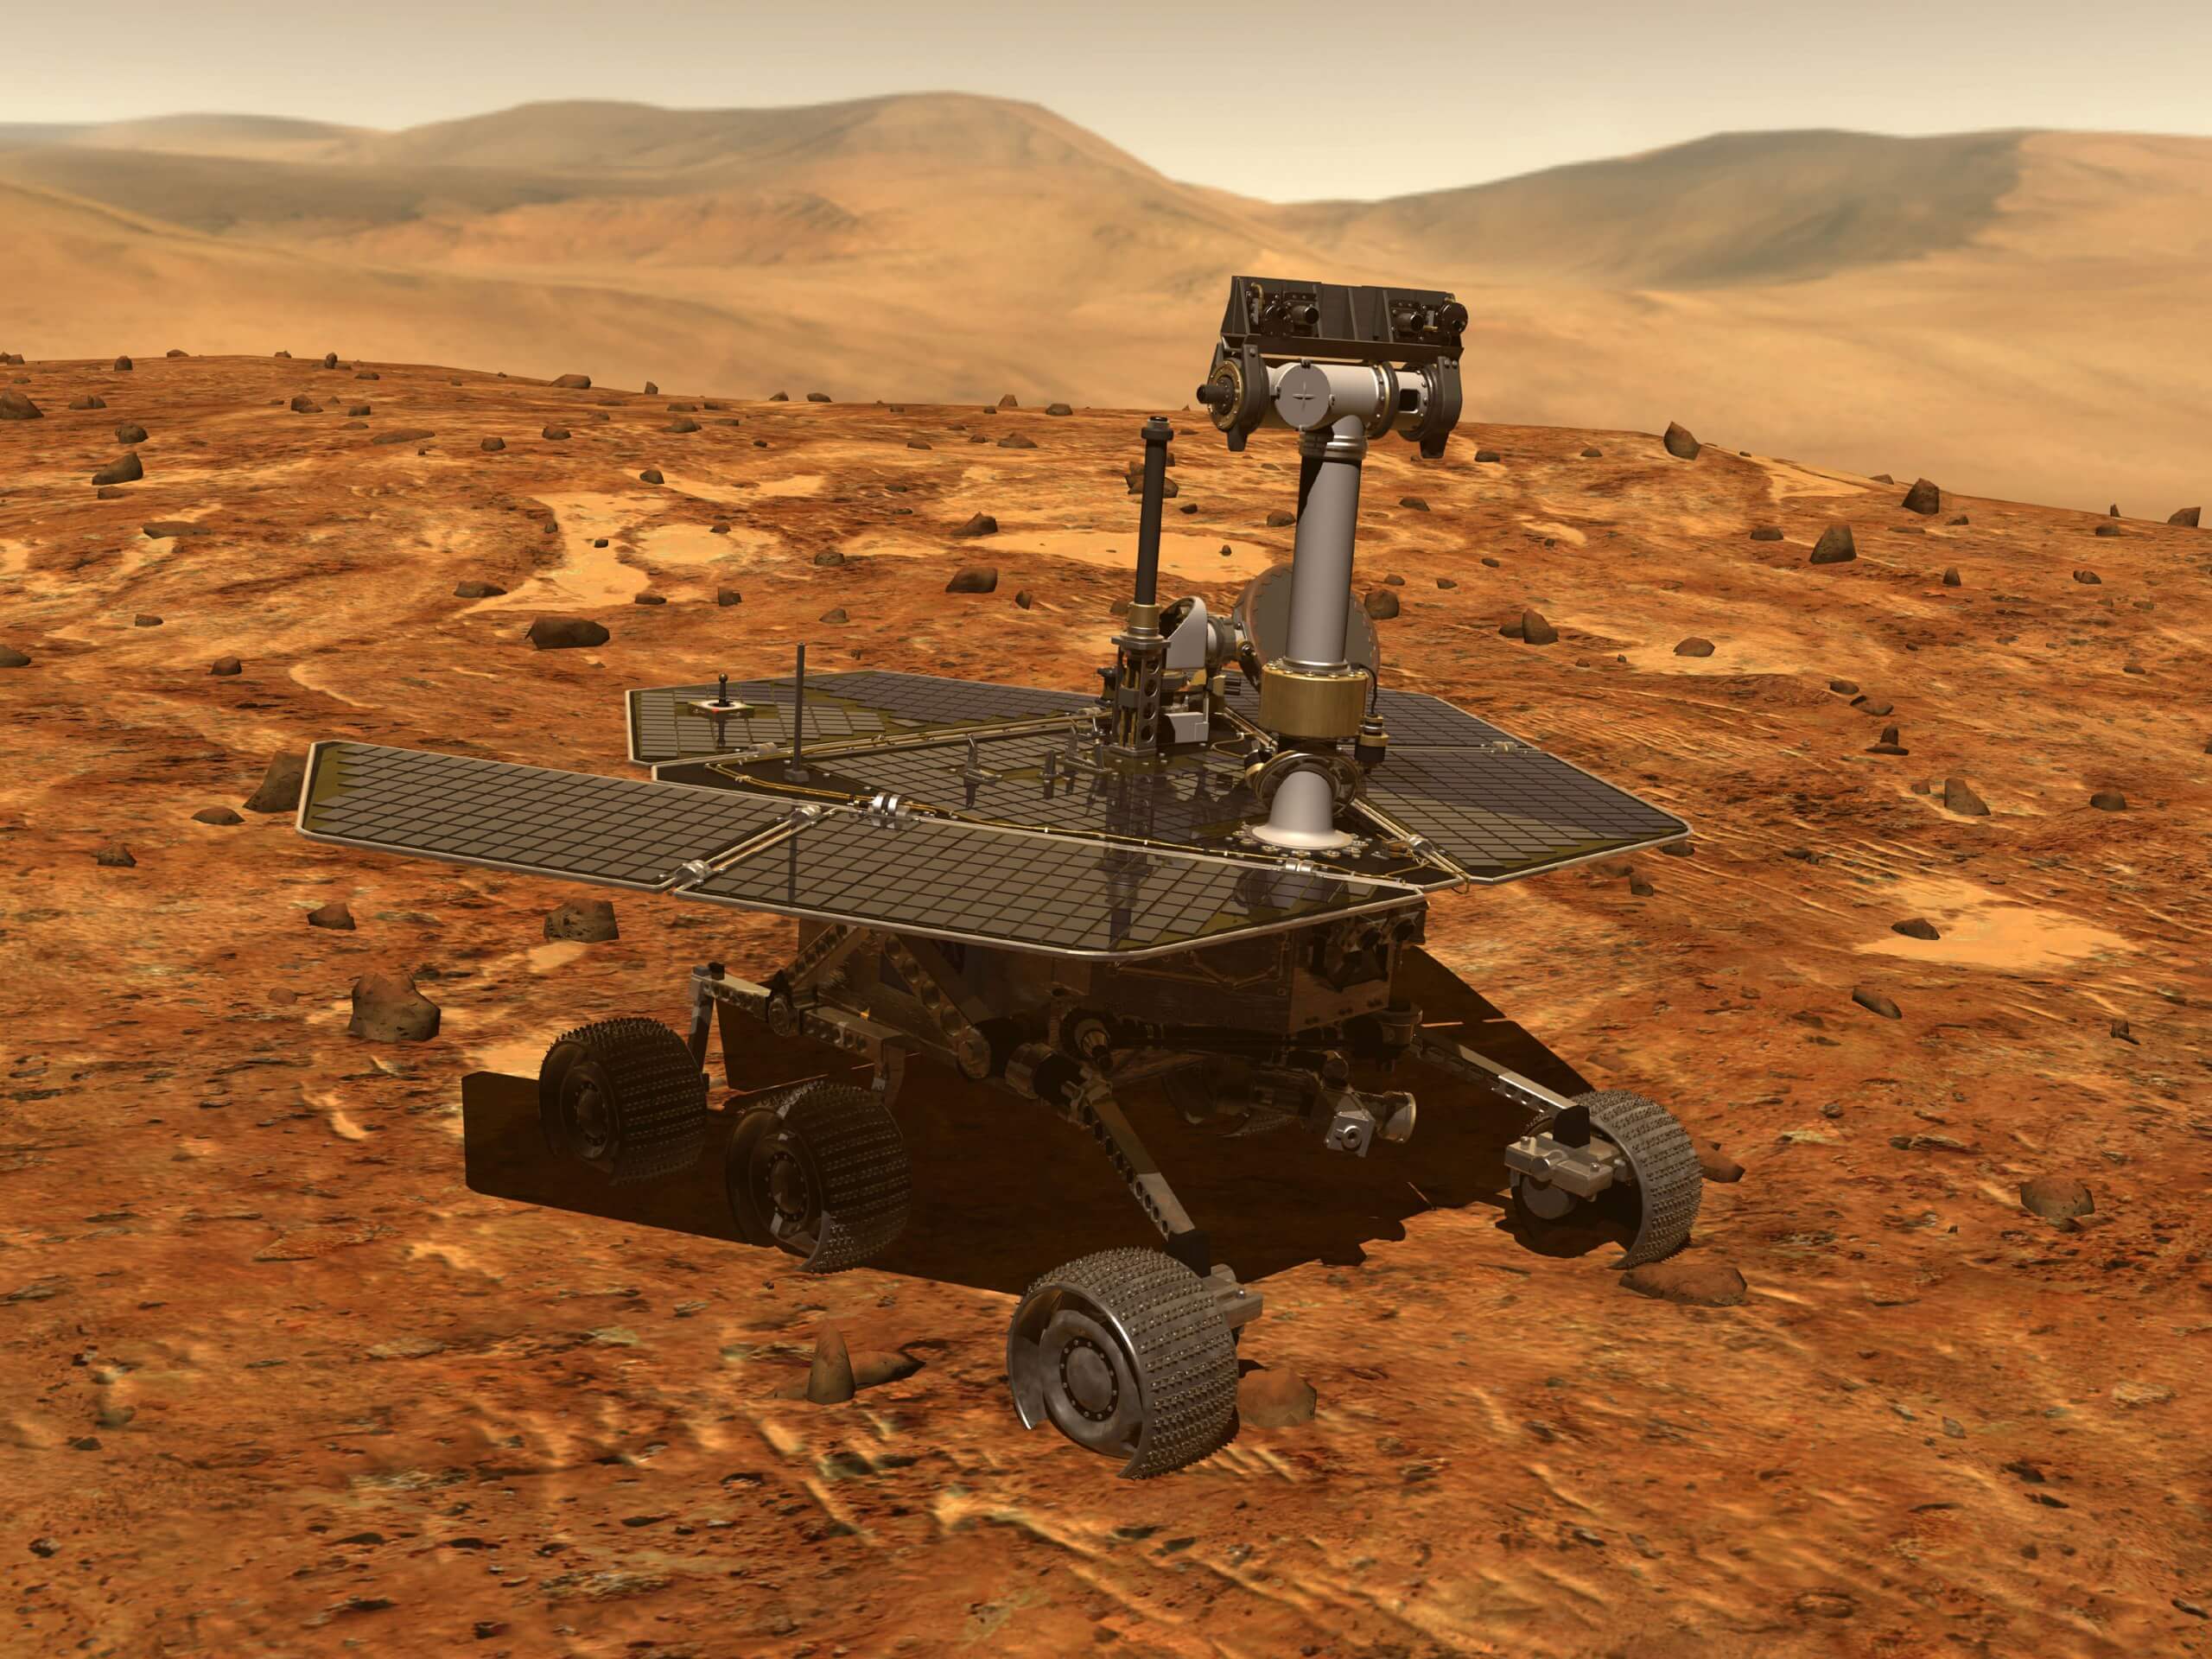 Mars Opportunity rover appears to be dead